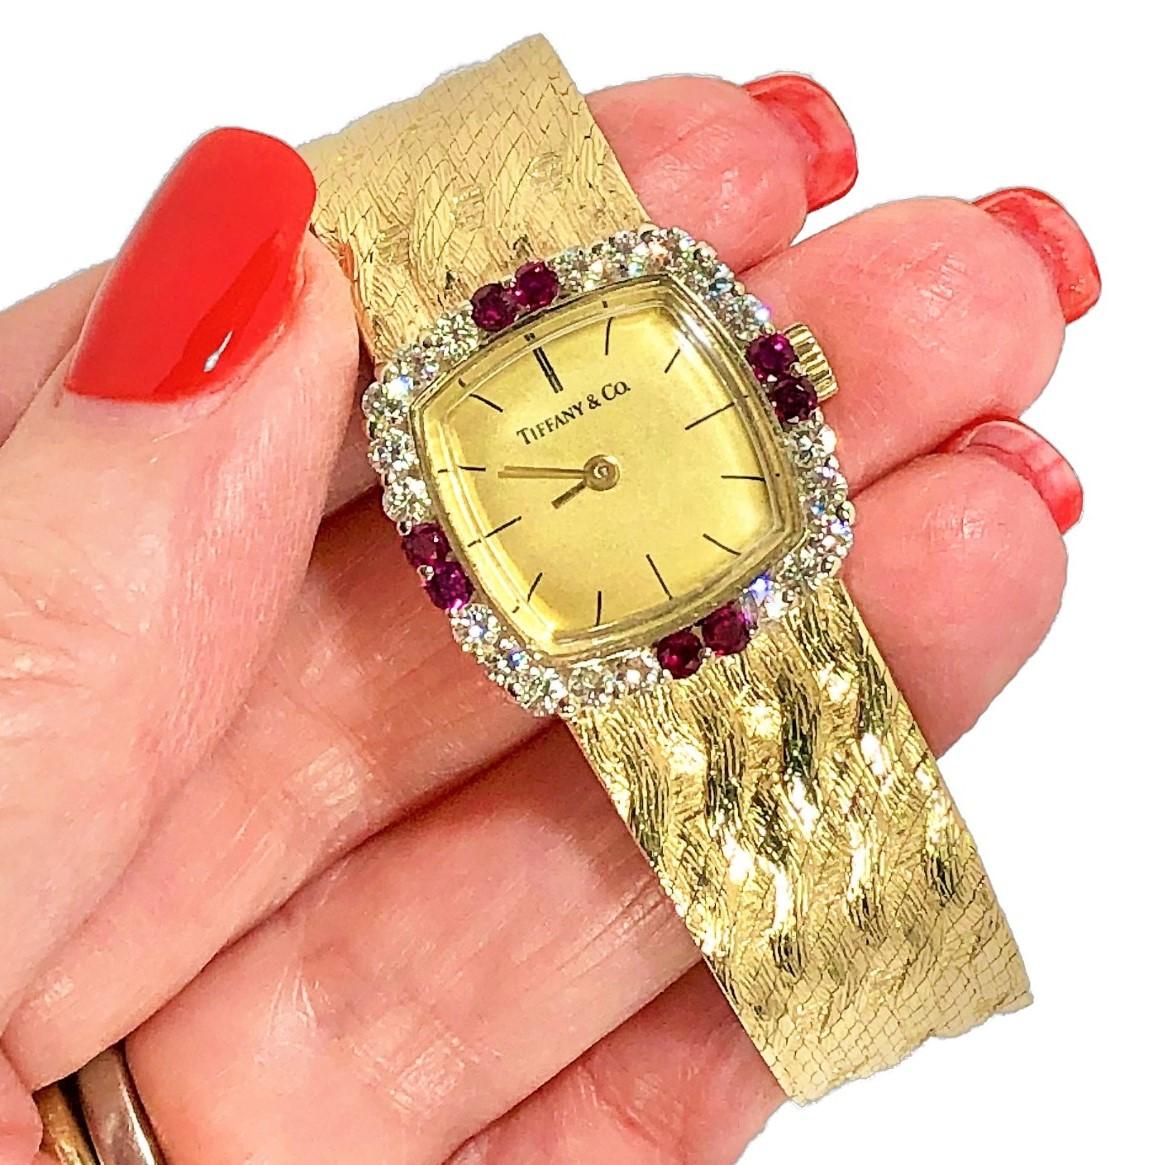 Tiffany & Co. Cushion Shaped Diamond and Ruby Bezel Watch in Yellow Gold In Good Condition For Sale In Palm Beach, FL